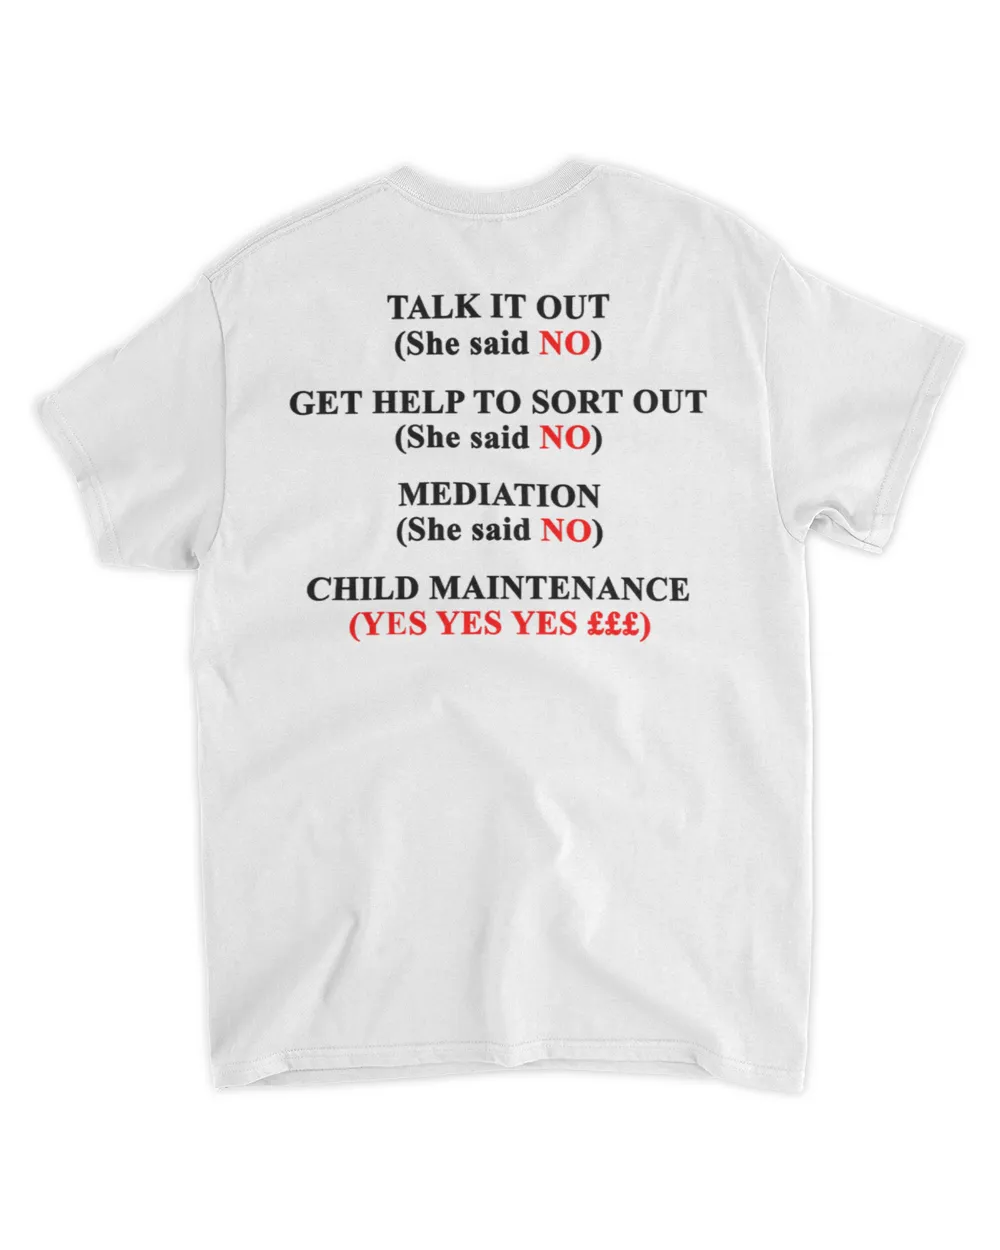  Talk it out she said no get help to sort out she said nos mediation she said no child maintenance yes yes yes shirt